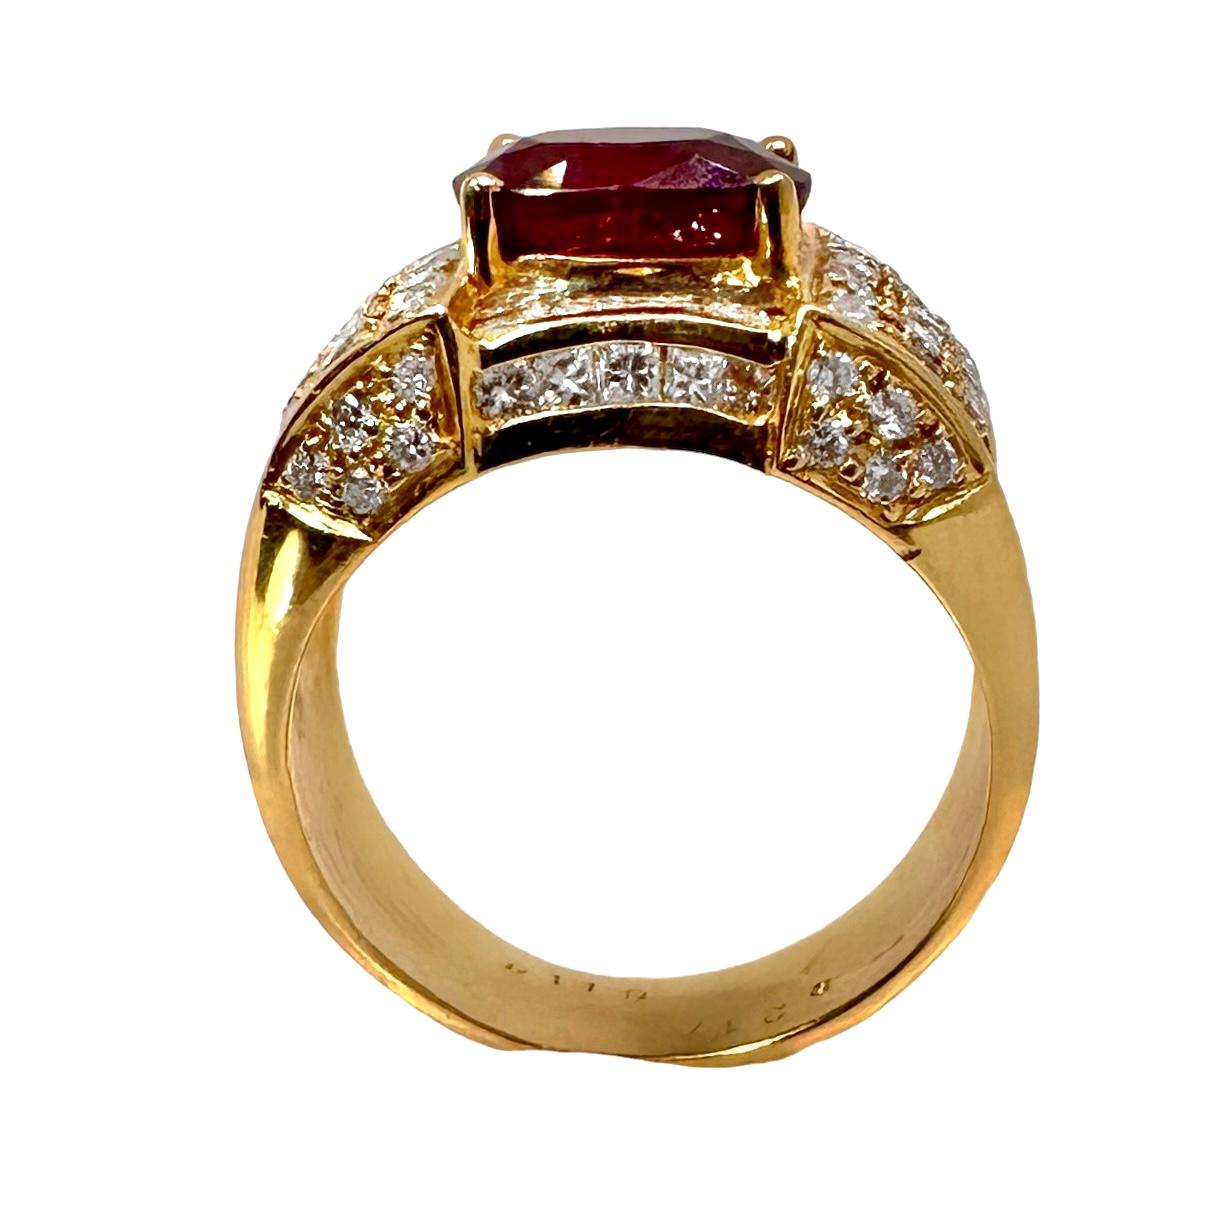 Late-20th Century Tailored 18k Yellow Gold, Ruby and Diamond Cocktail Ring For Sale 6